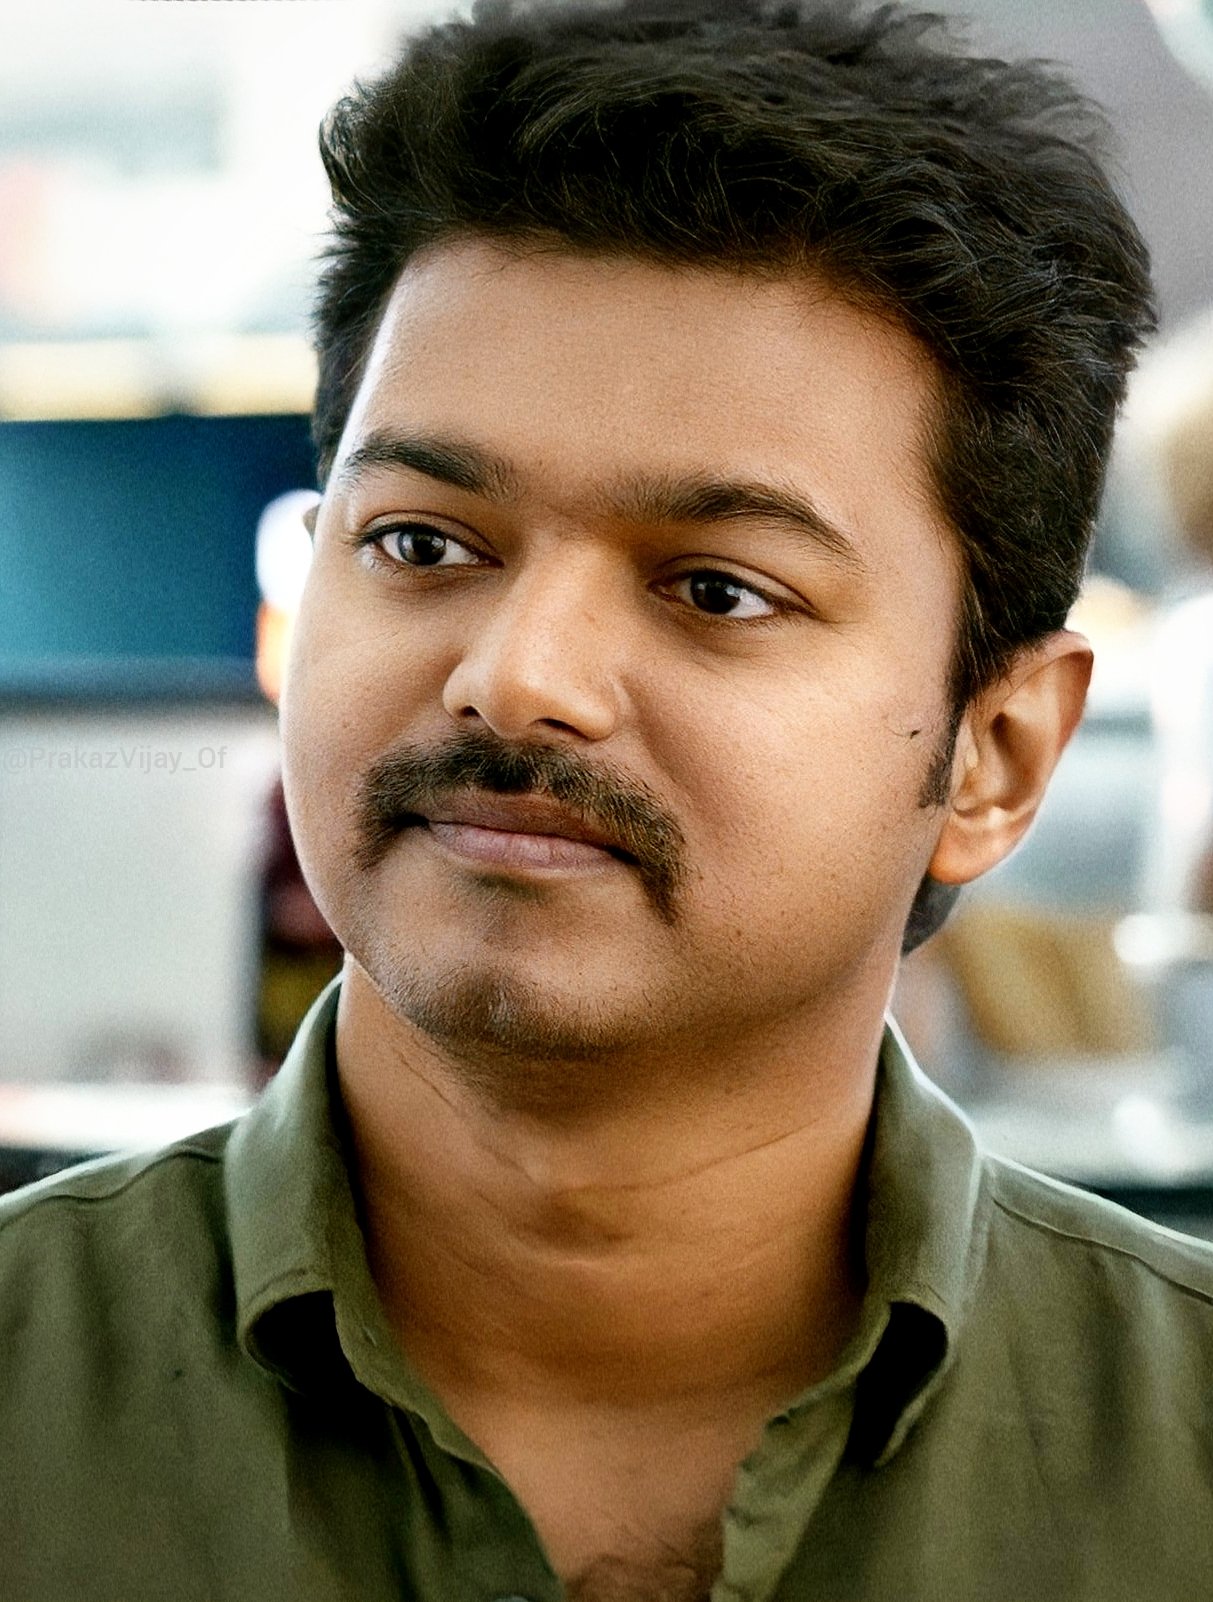 Most Popular Hero In South  Vijay The Most Popular South Indian Actor   Most Famous Tamil Actor  Famous South Actors Recent Survey  Popular South  Actors  Filmibeat